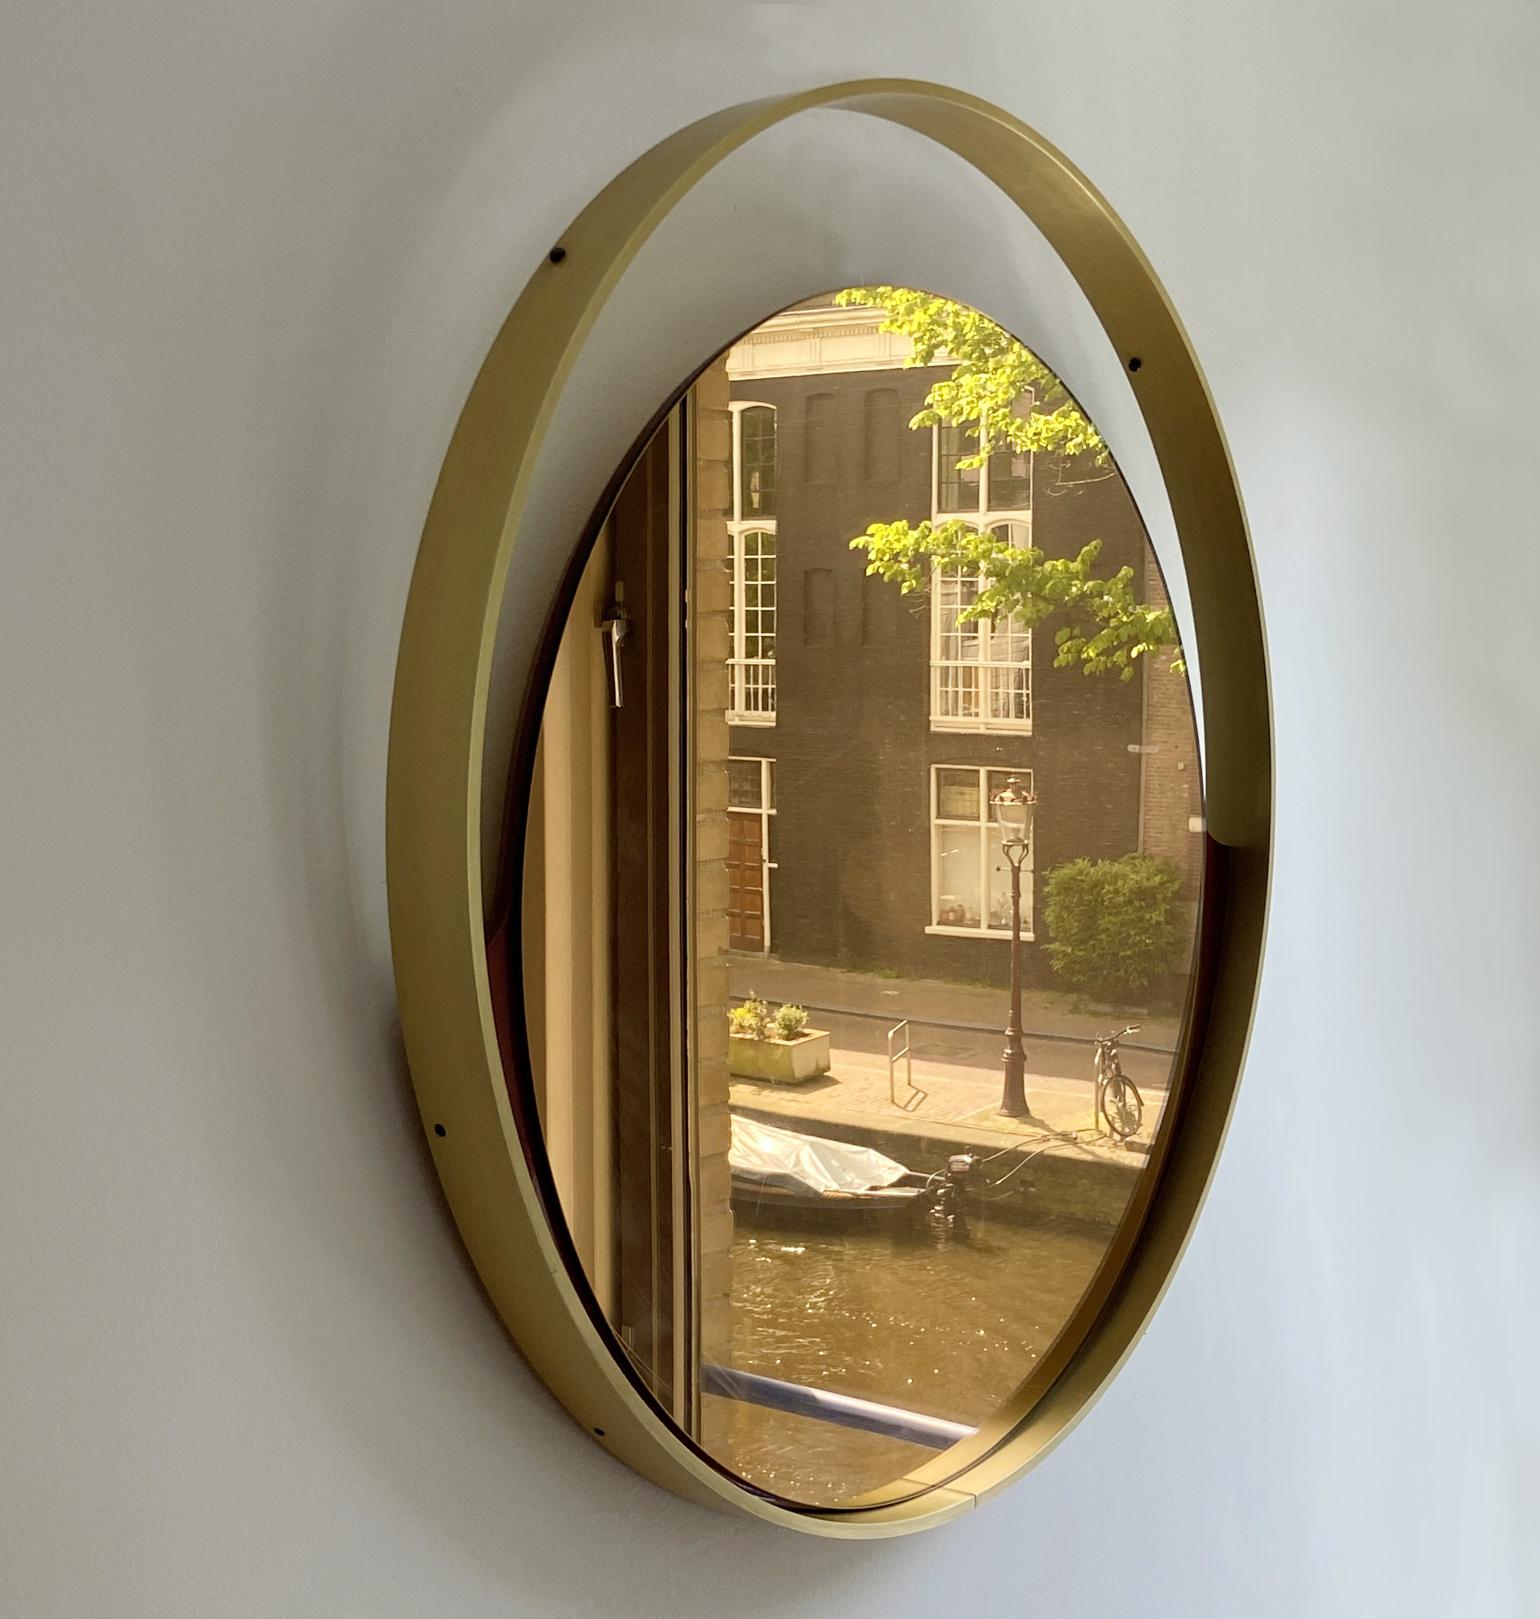 Minimalist lightly tinted bronze round mirror by the Italian Company Rimadesio. Aluminium border is anodized in gold and holds a bronze mirror descending like a sunset. It is linked to the frame by two amber enameled wings. The back in handcrafted